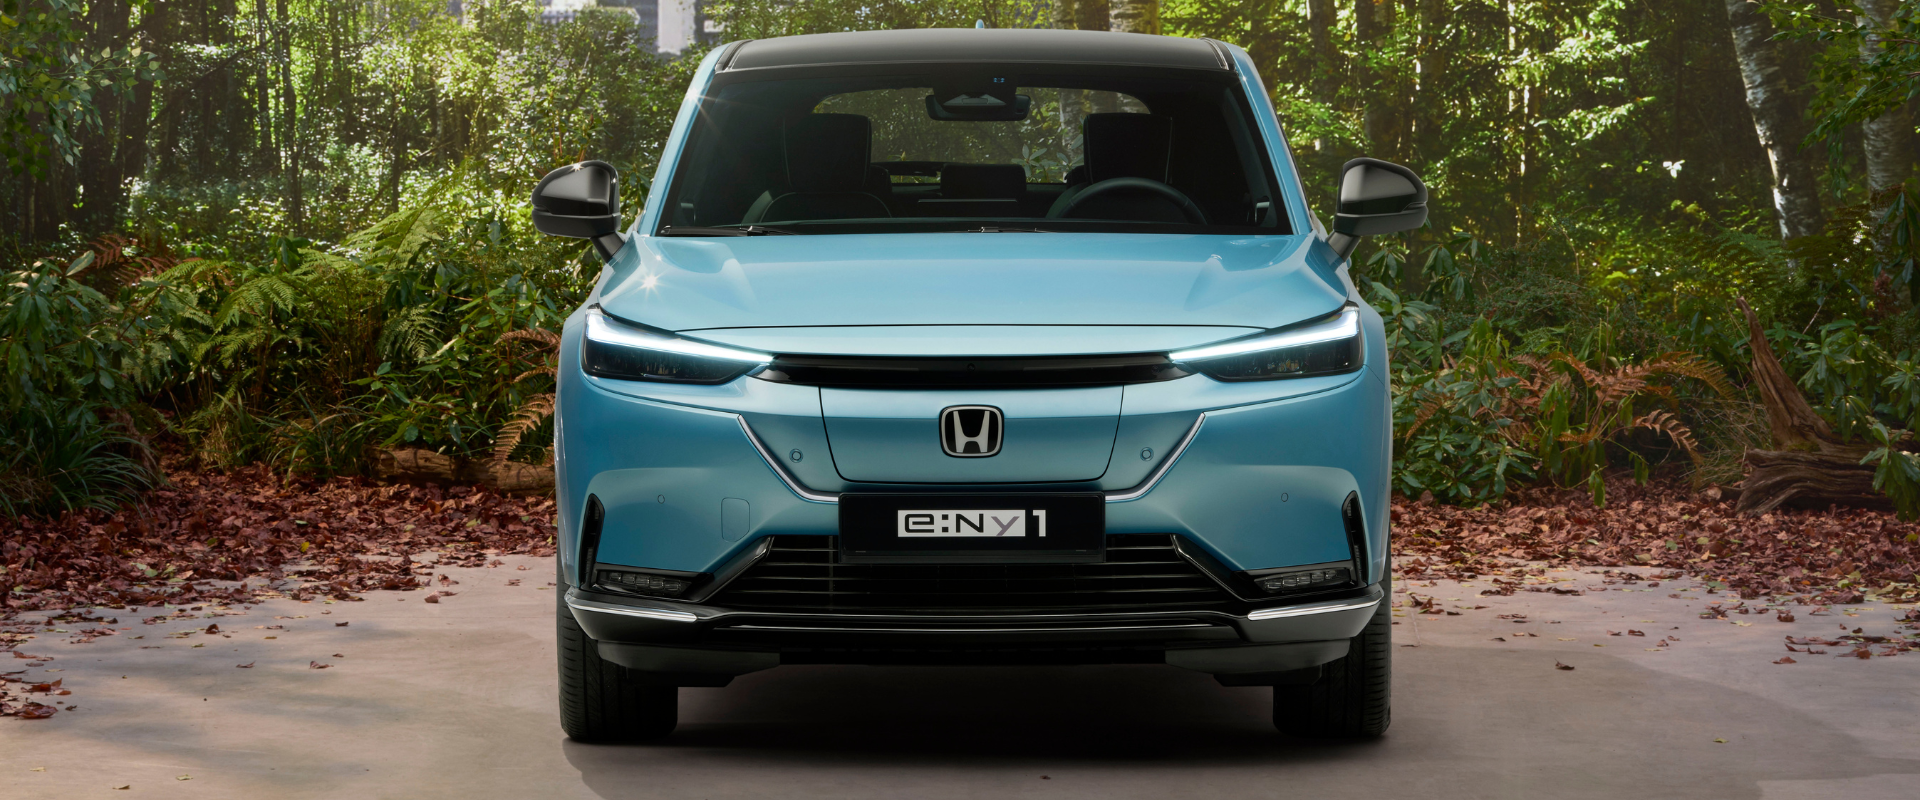 On the Horizon: Honda’s First Fully Electric SUV